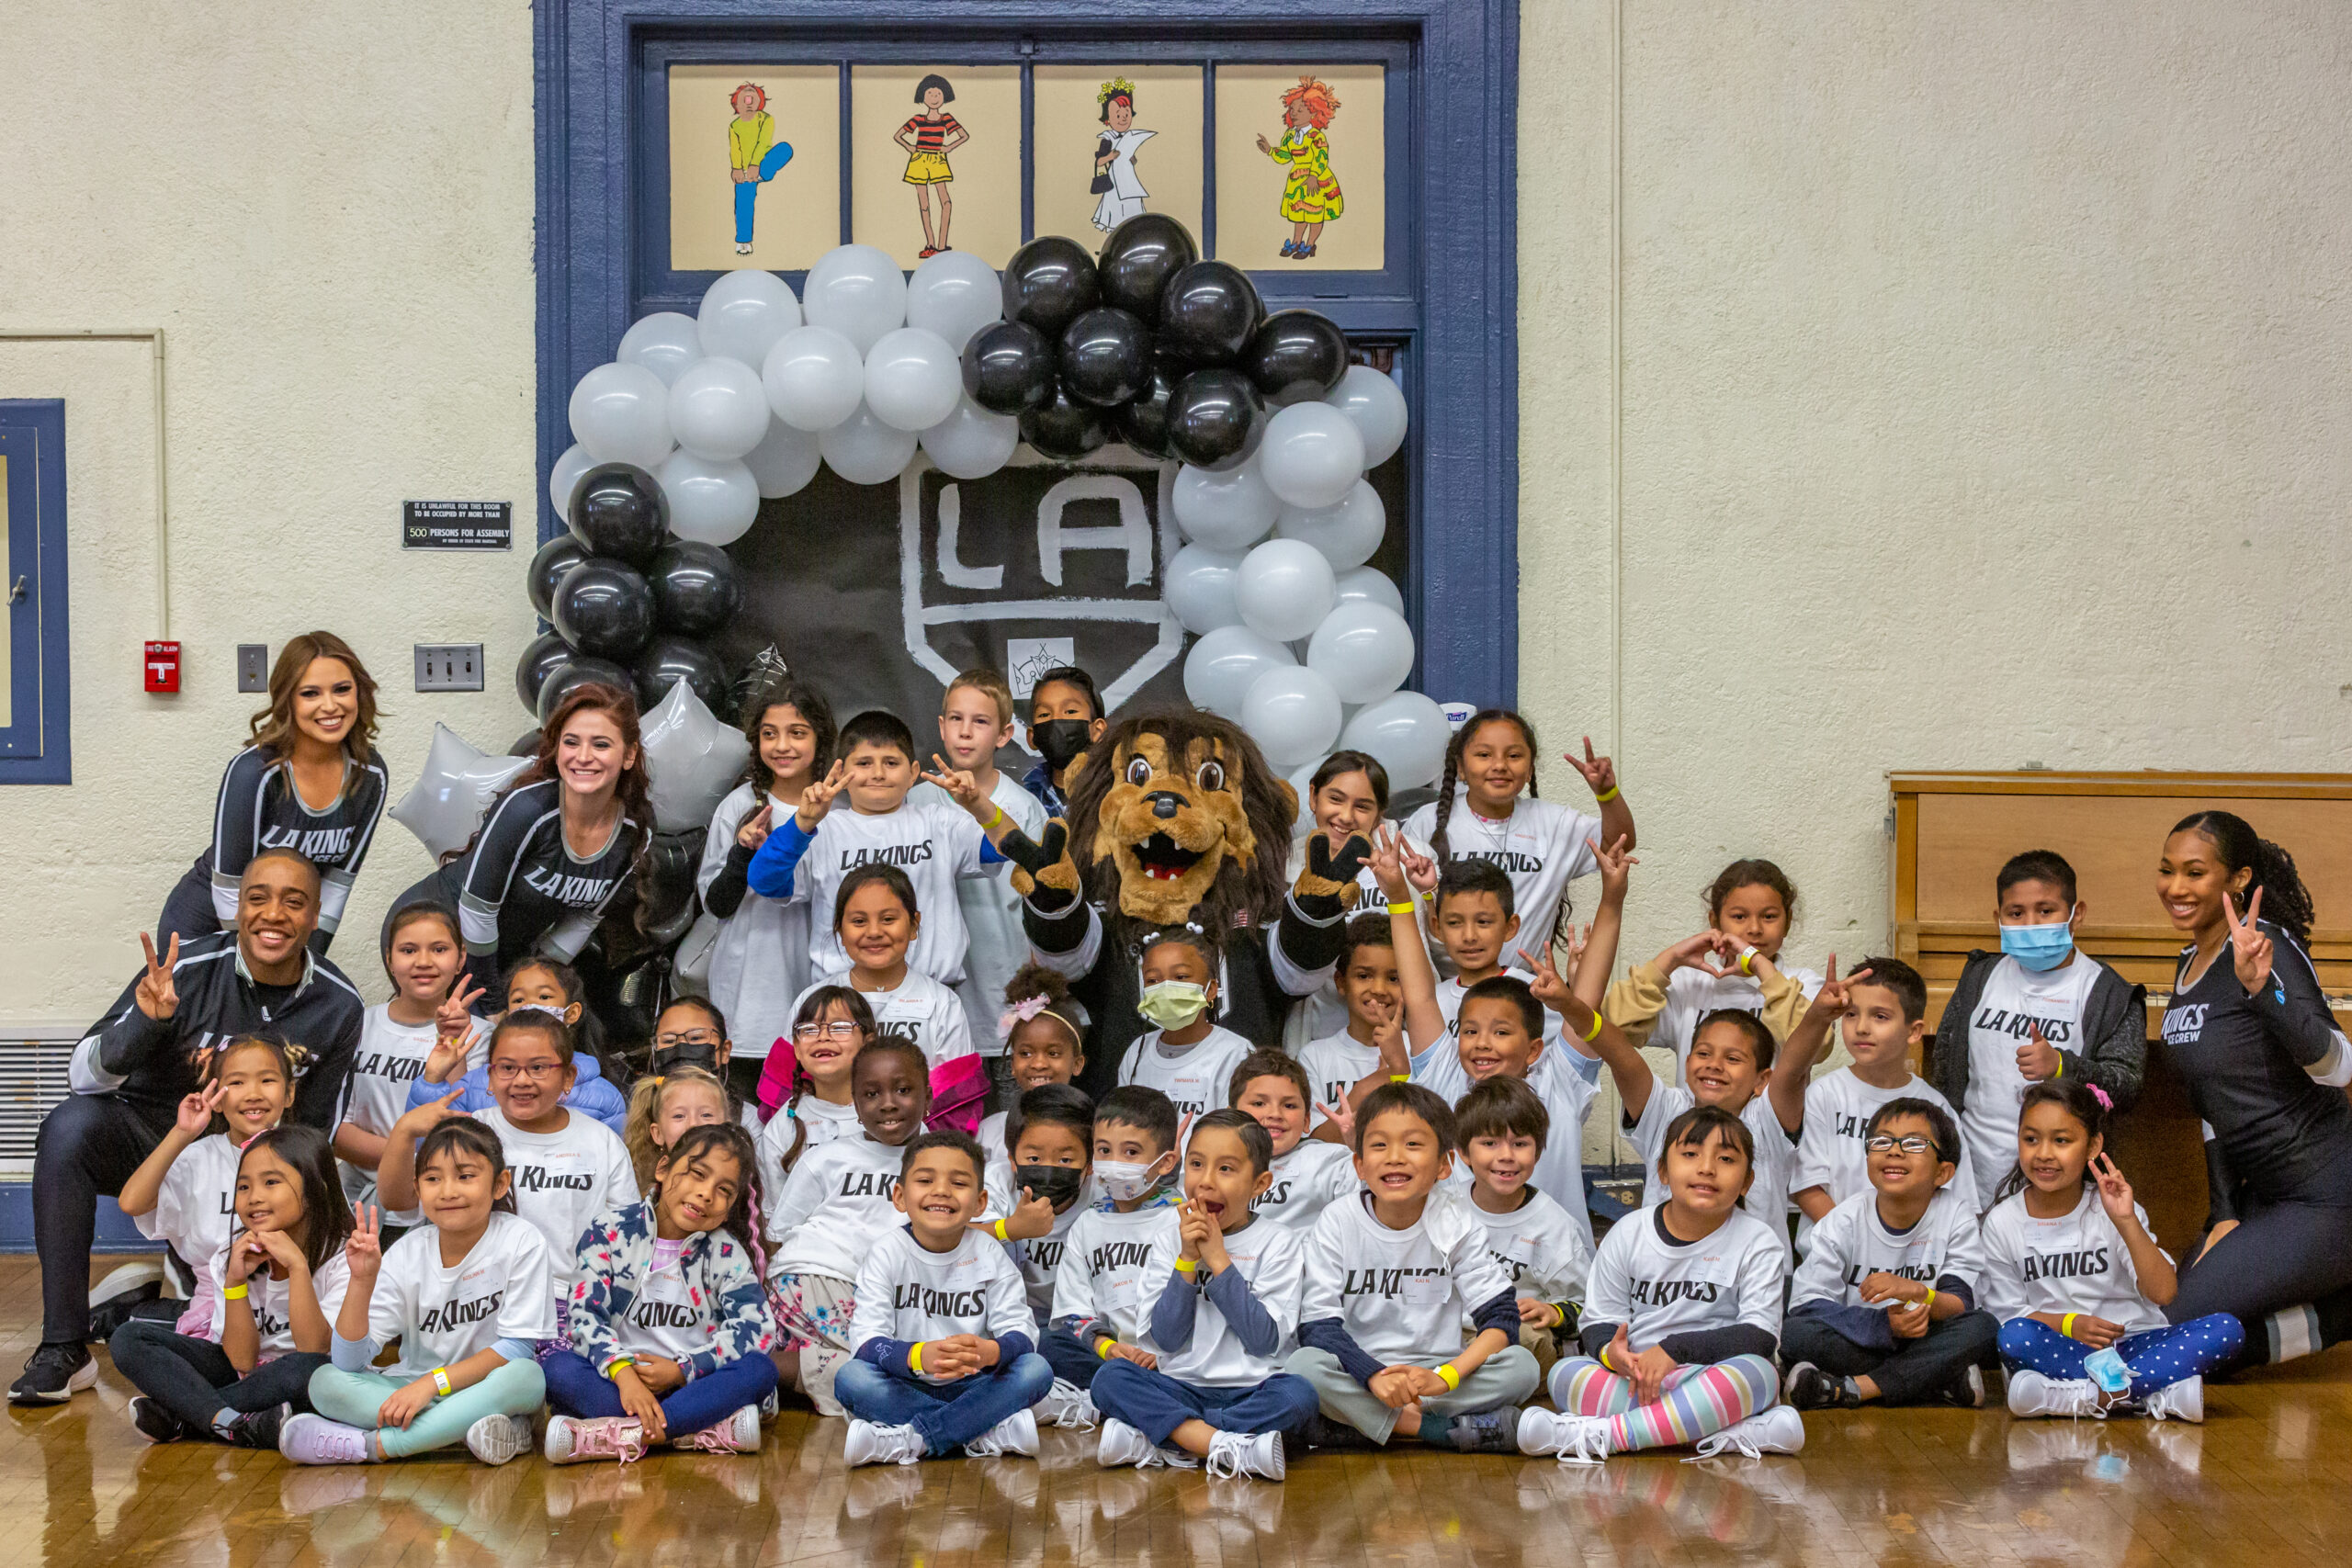 LA Kings Bring New Shoes and Hockey to 420 Kids in LA – Shoes That Fit